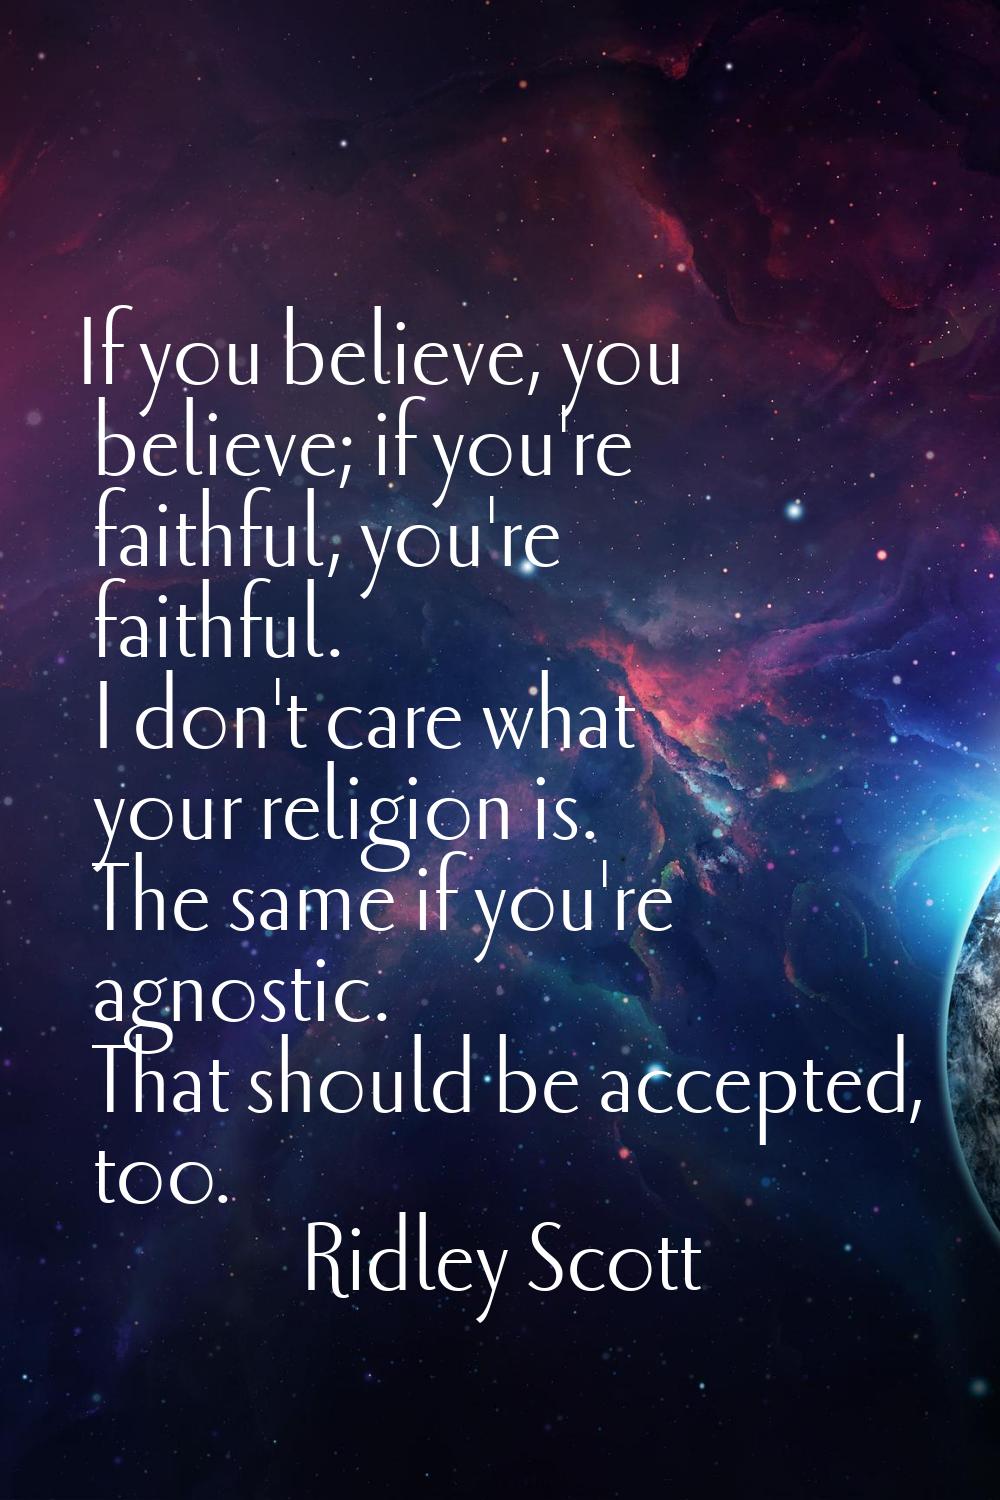 If you believe, you believe; if you're faithful, you're faithful. I don't care what your religion i